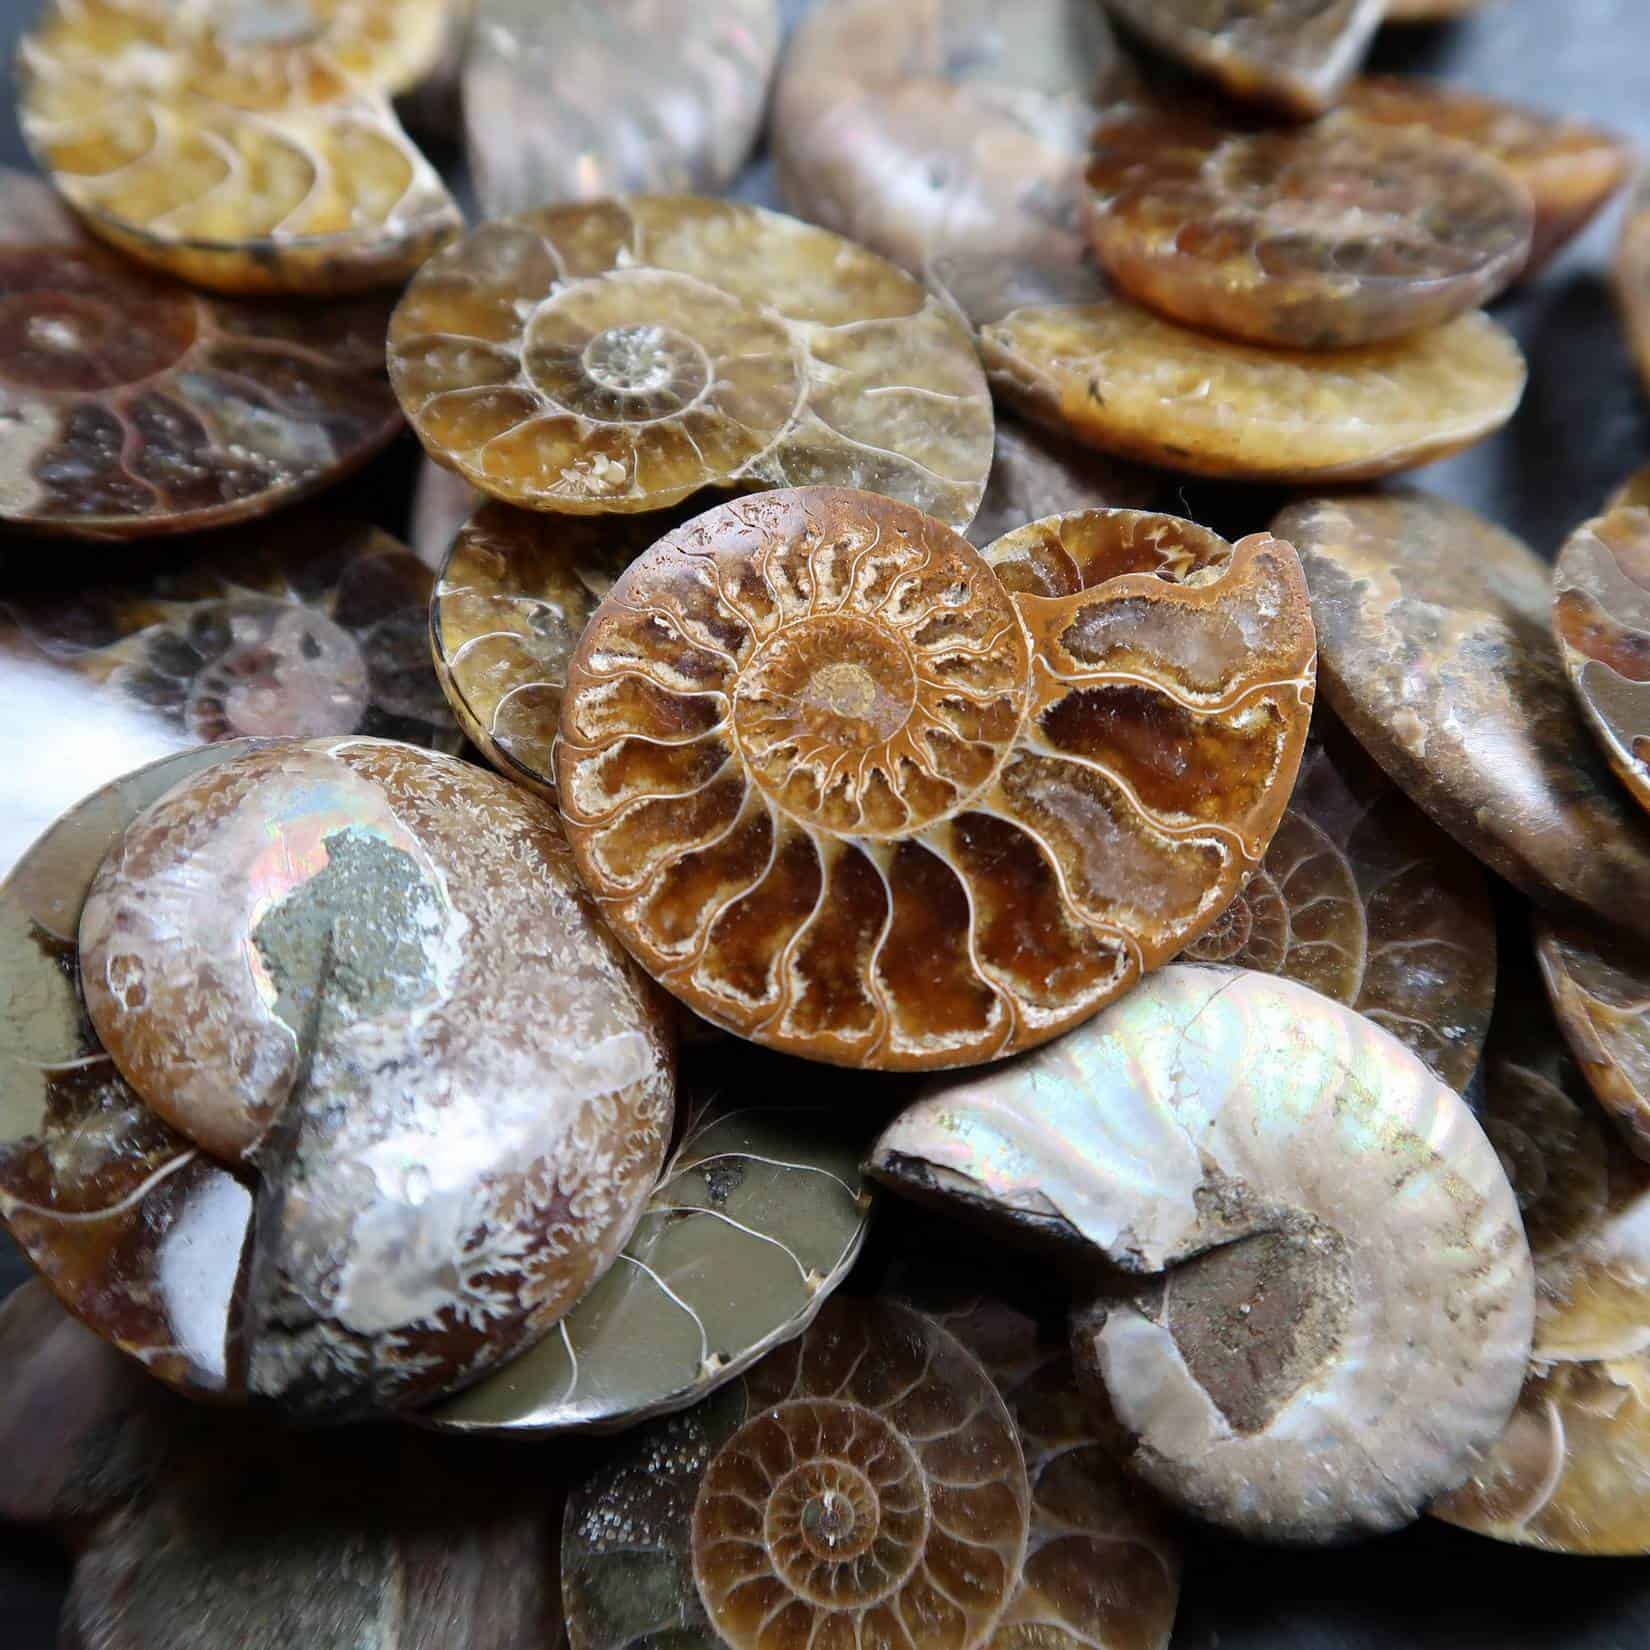 Ammonite Vs Nautilus Fossil - Store requires up 1 to 2 business days to ...